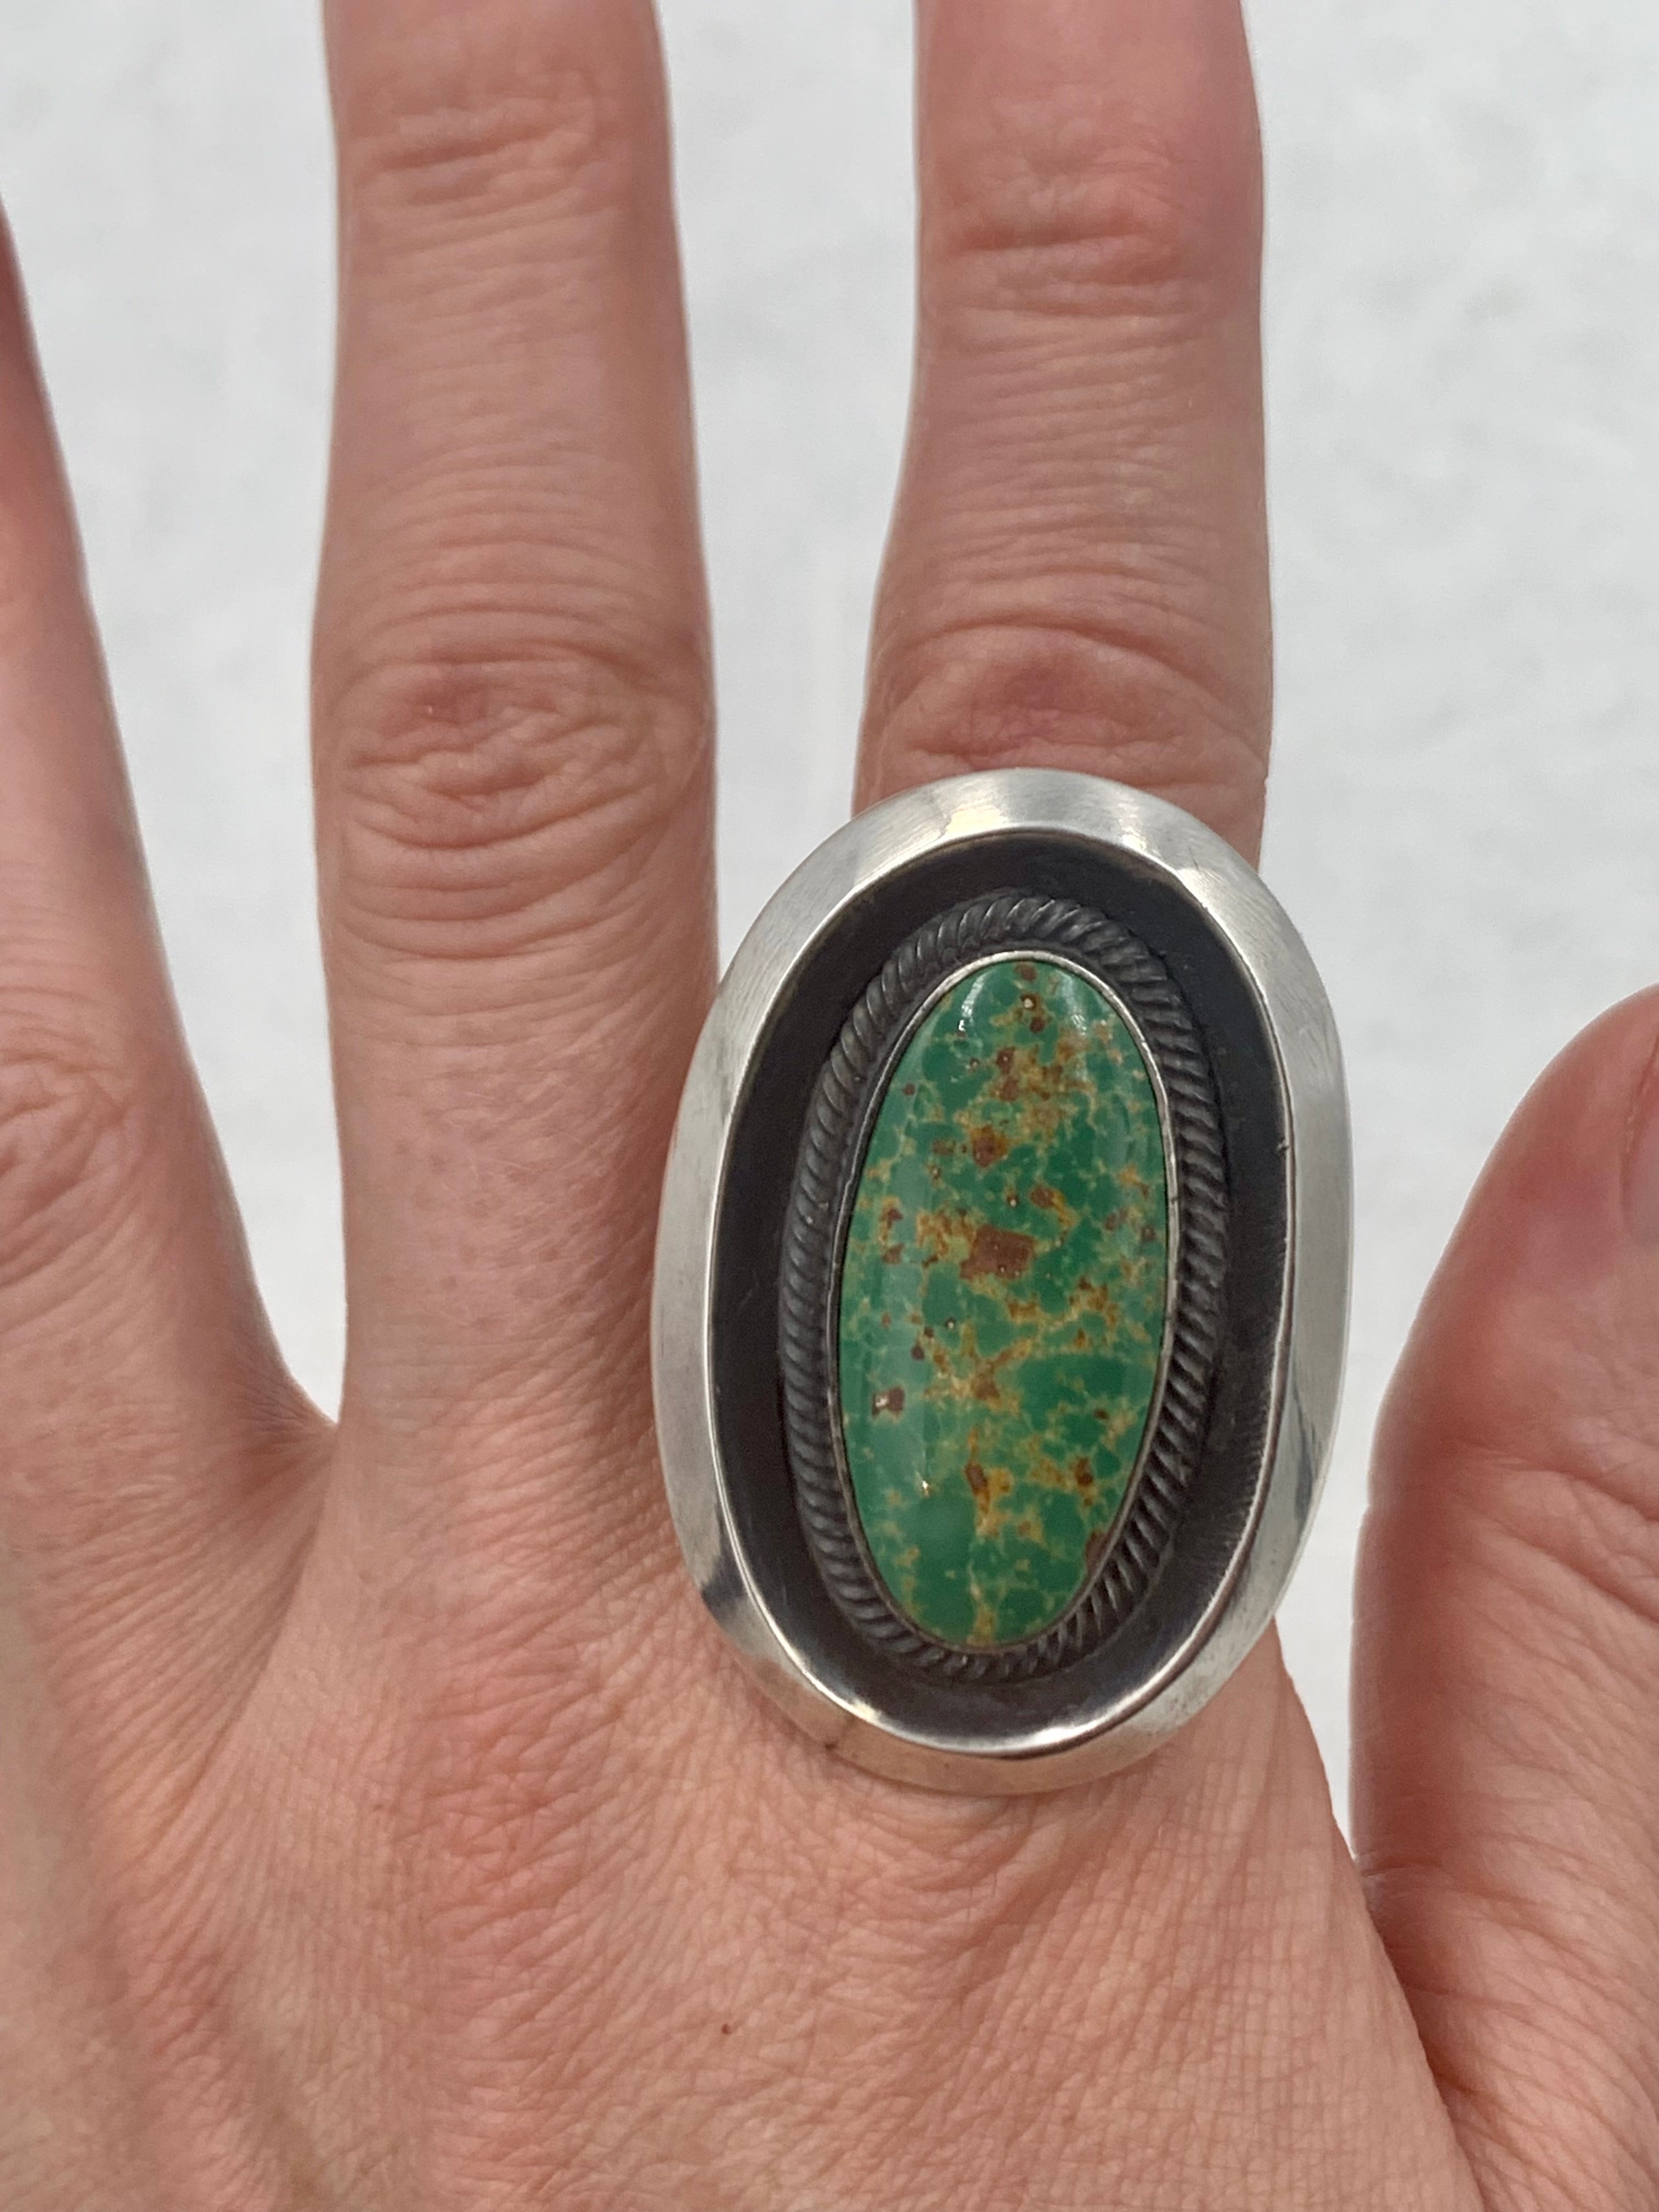 Turquoise ring created by Navajo silversmith Leon Martinez. The ring has a 1/2 inch x 1 inch green turquoise stone in a 1 inch x 1 3/4 inch contemporary sterling silver setting. 

The 1/4 inch band is adjustable from size 7 to size 13. 
Hallmark on